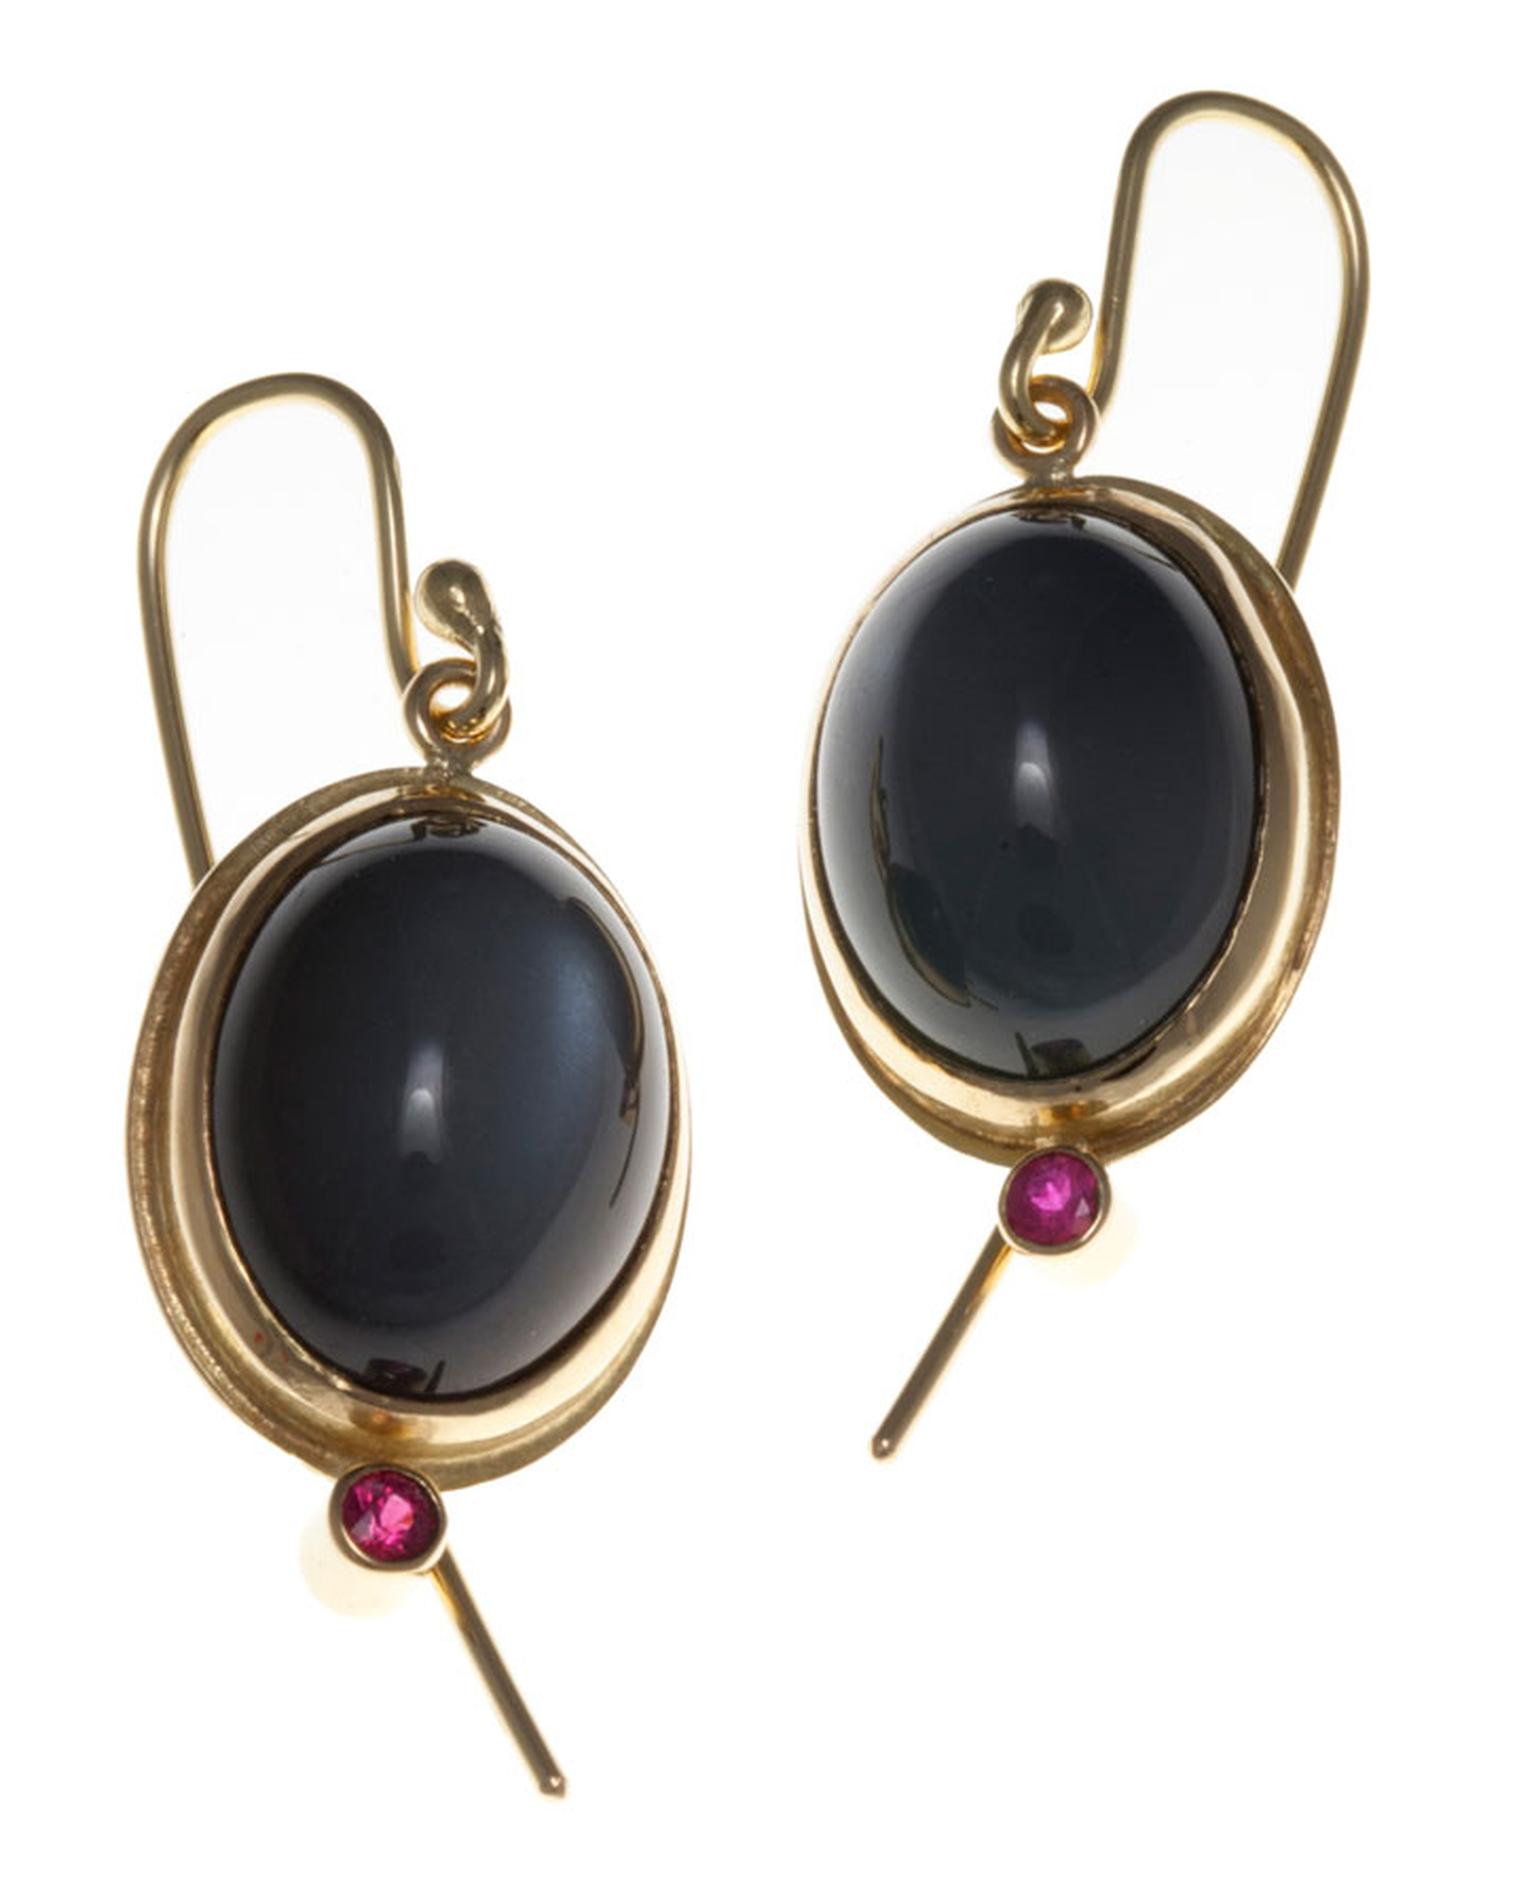 Kath Libbert. Graeme-McColm_earrings-in-18ct-gold-with-grey-moonstone-and-rubies-